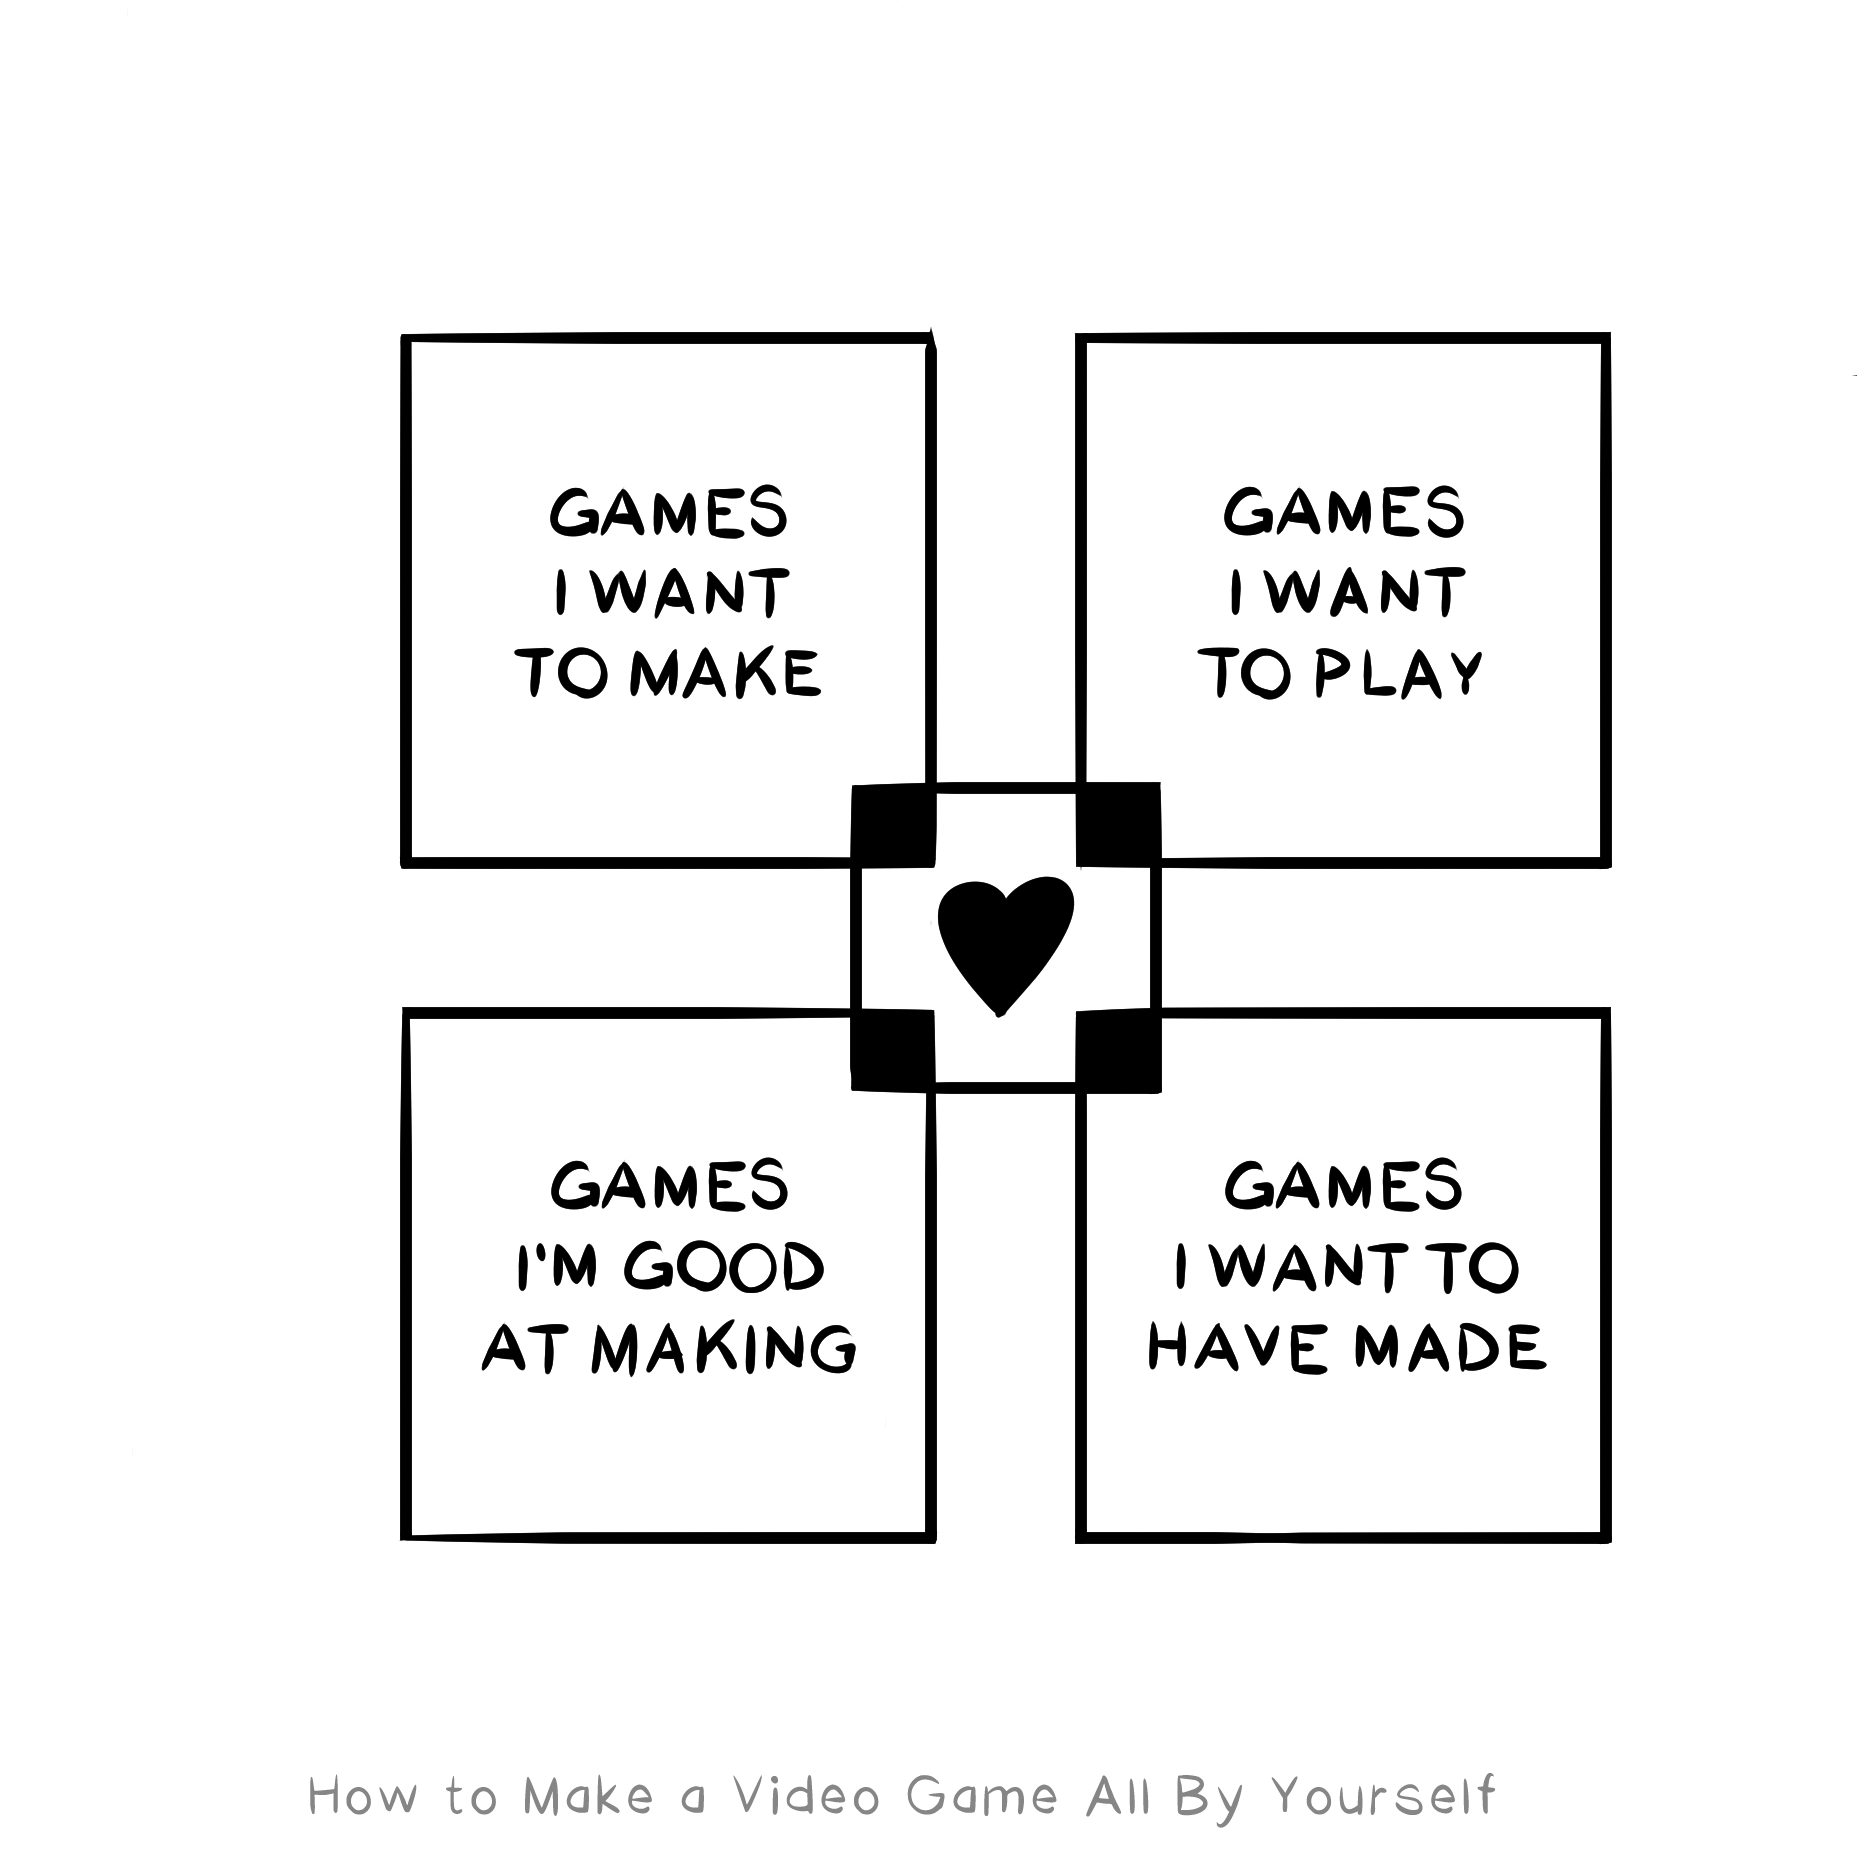 This drawing features four boxes, reading: Games I Want To Make, Games I Want to Play, Games I'm Good at Making, and Games I Want to Have Made. Another box is in the middle featuring a heart in the center.